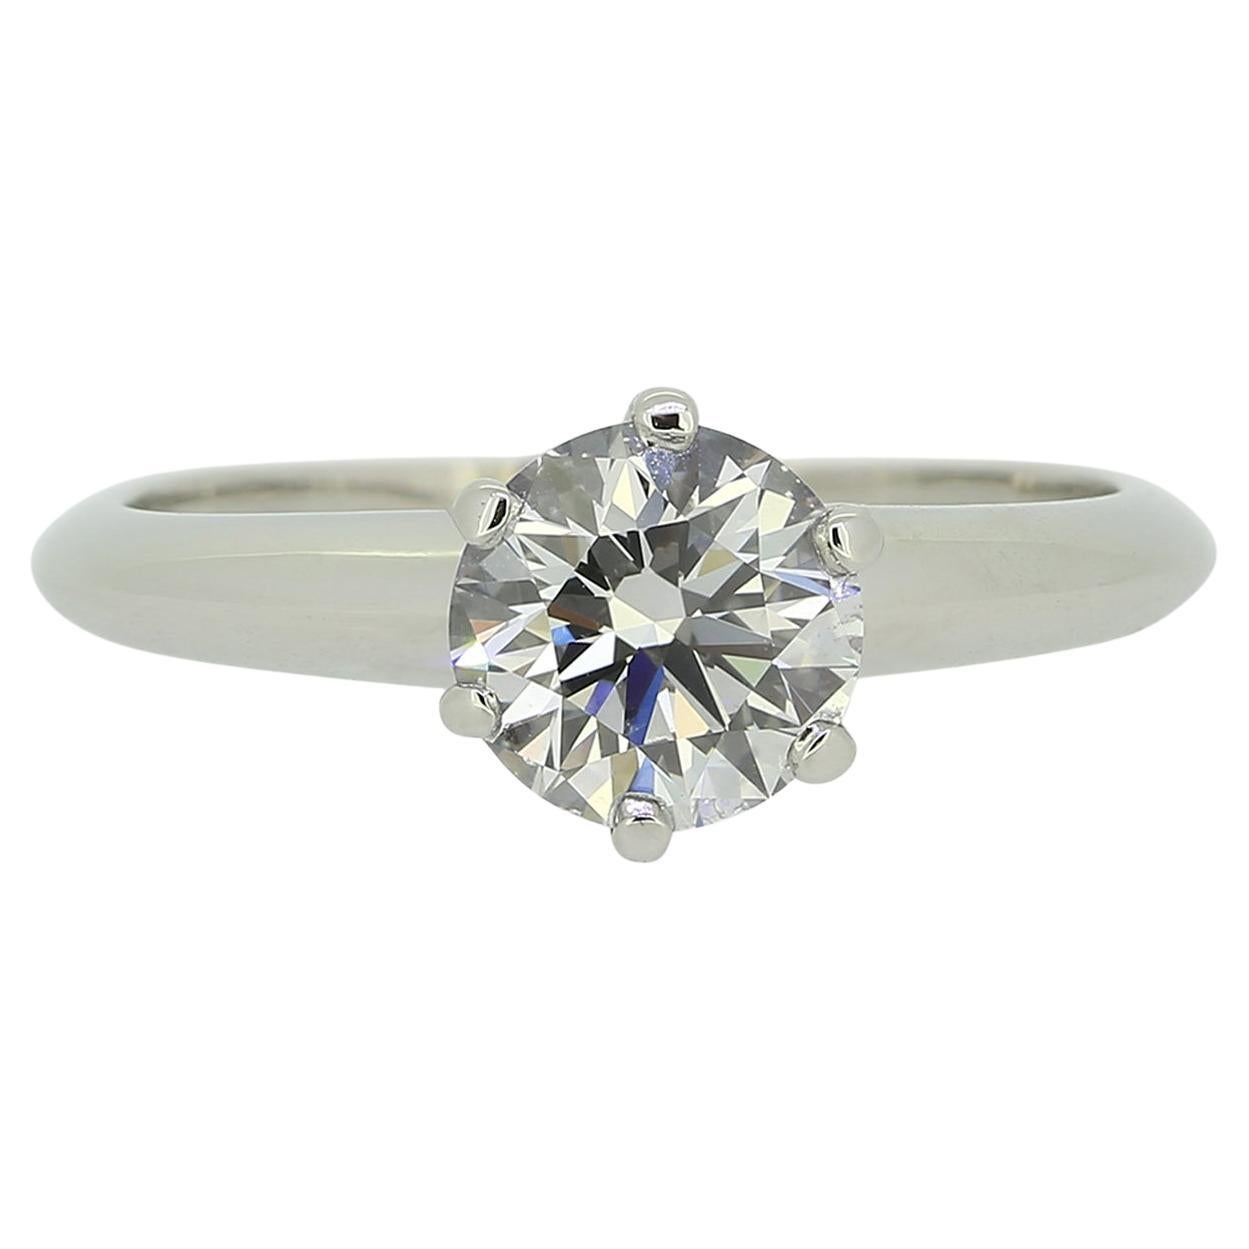 Tiffany & Co. 1.01 Carat Diamond Engagement Ring For Sale